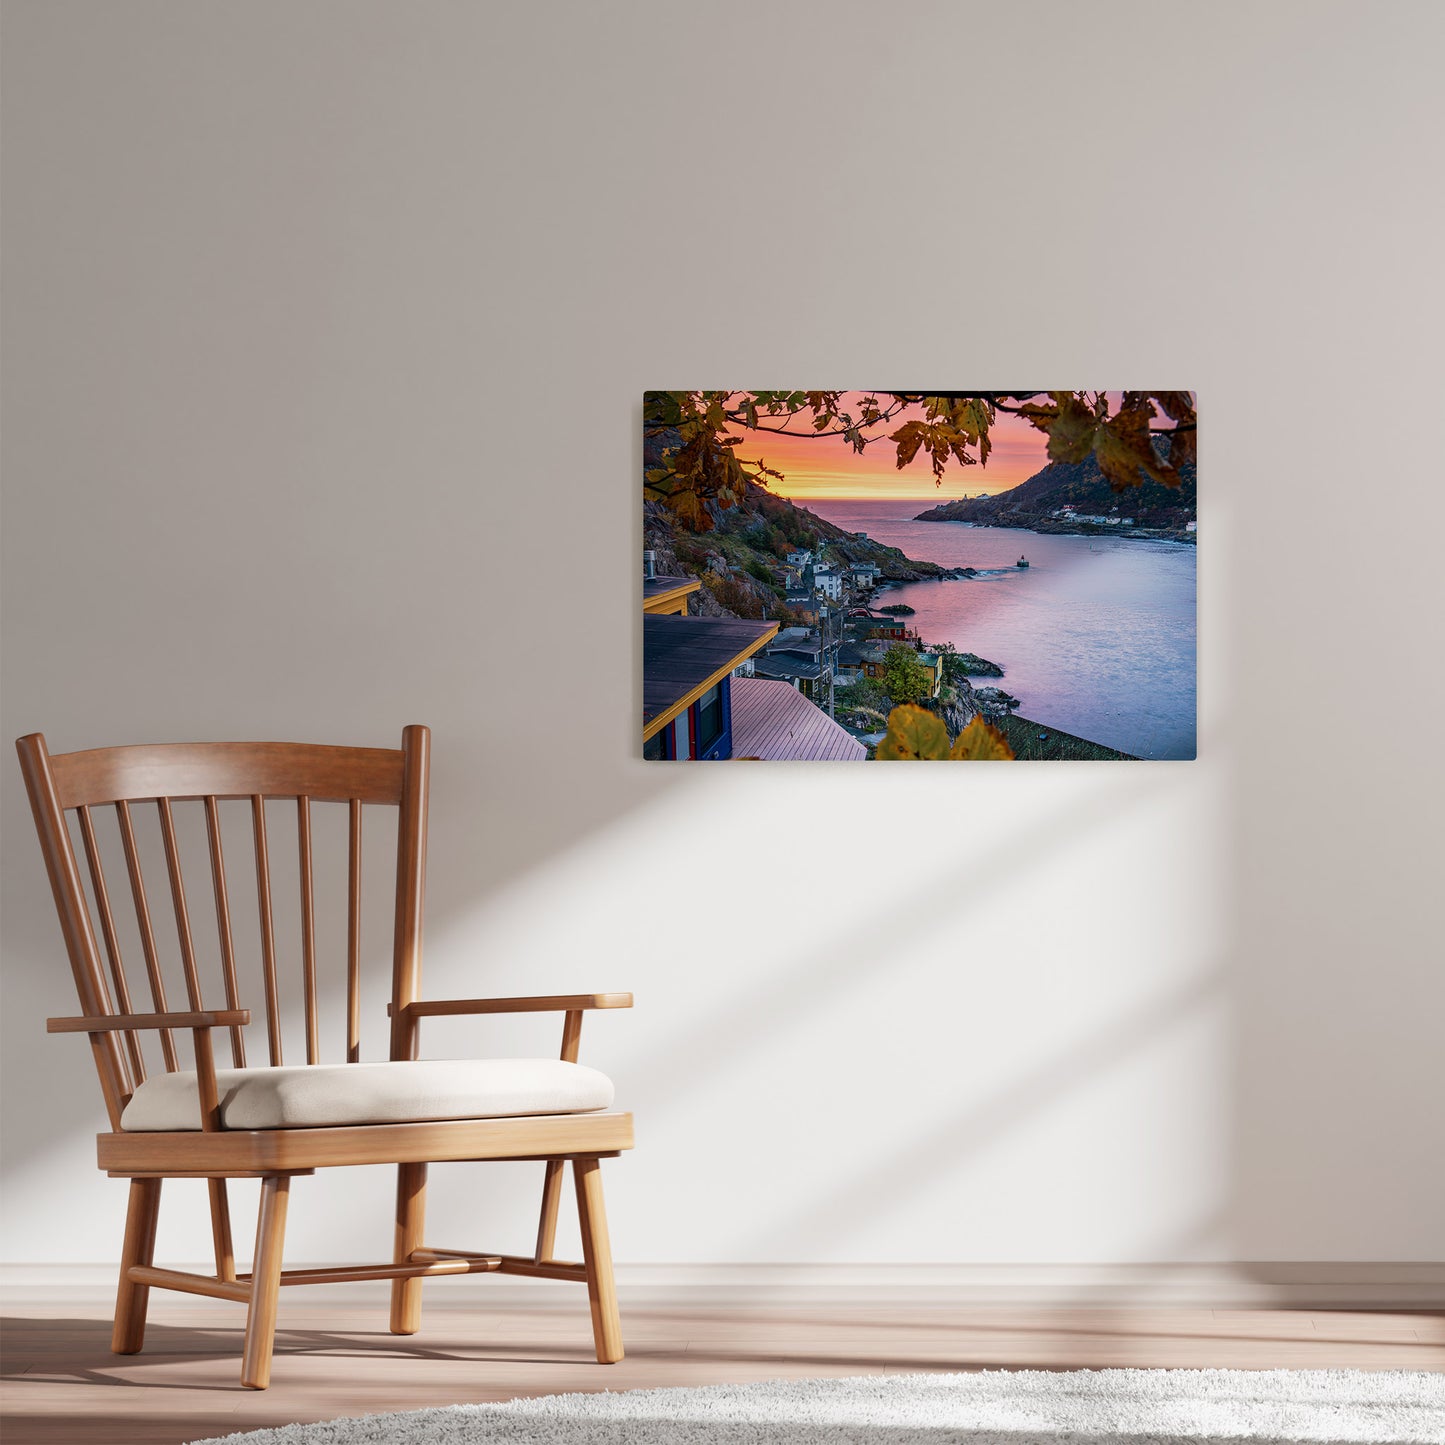 Ray Mackey's Battery Sunrise photography reproduced on HD metal print and displayed on wall